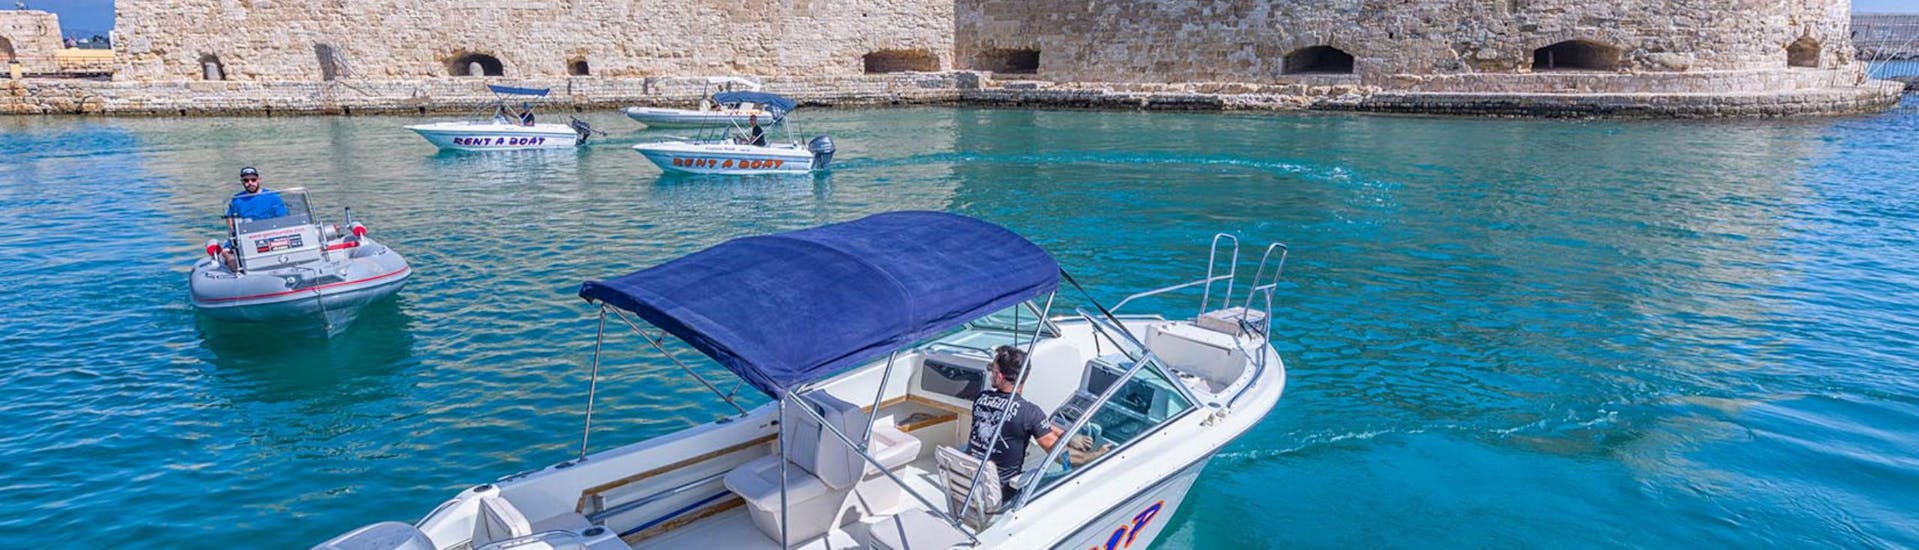 Private Boat Trip with Snorkeling from Heraklion.